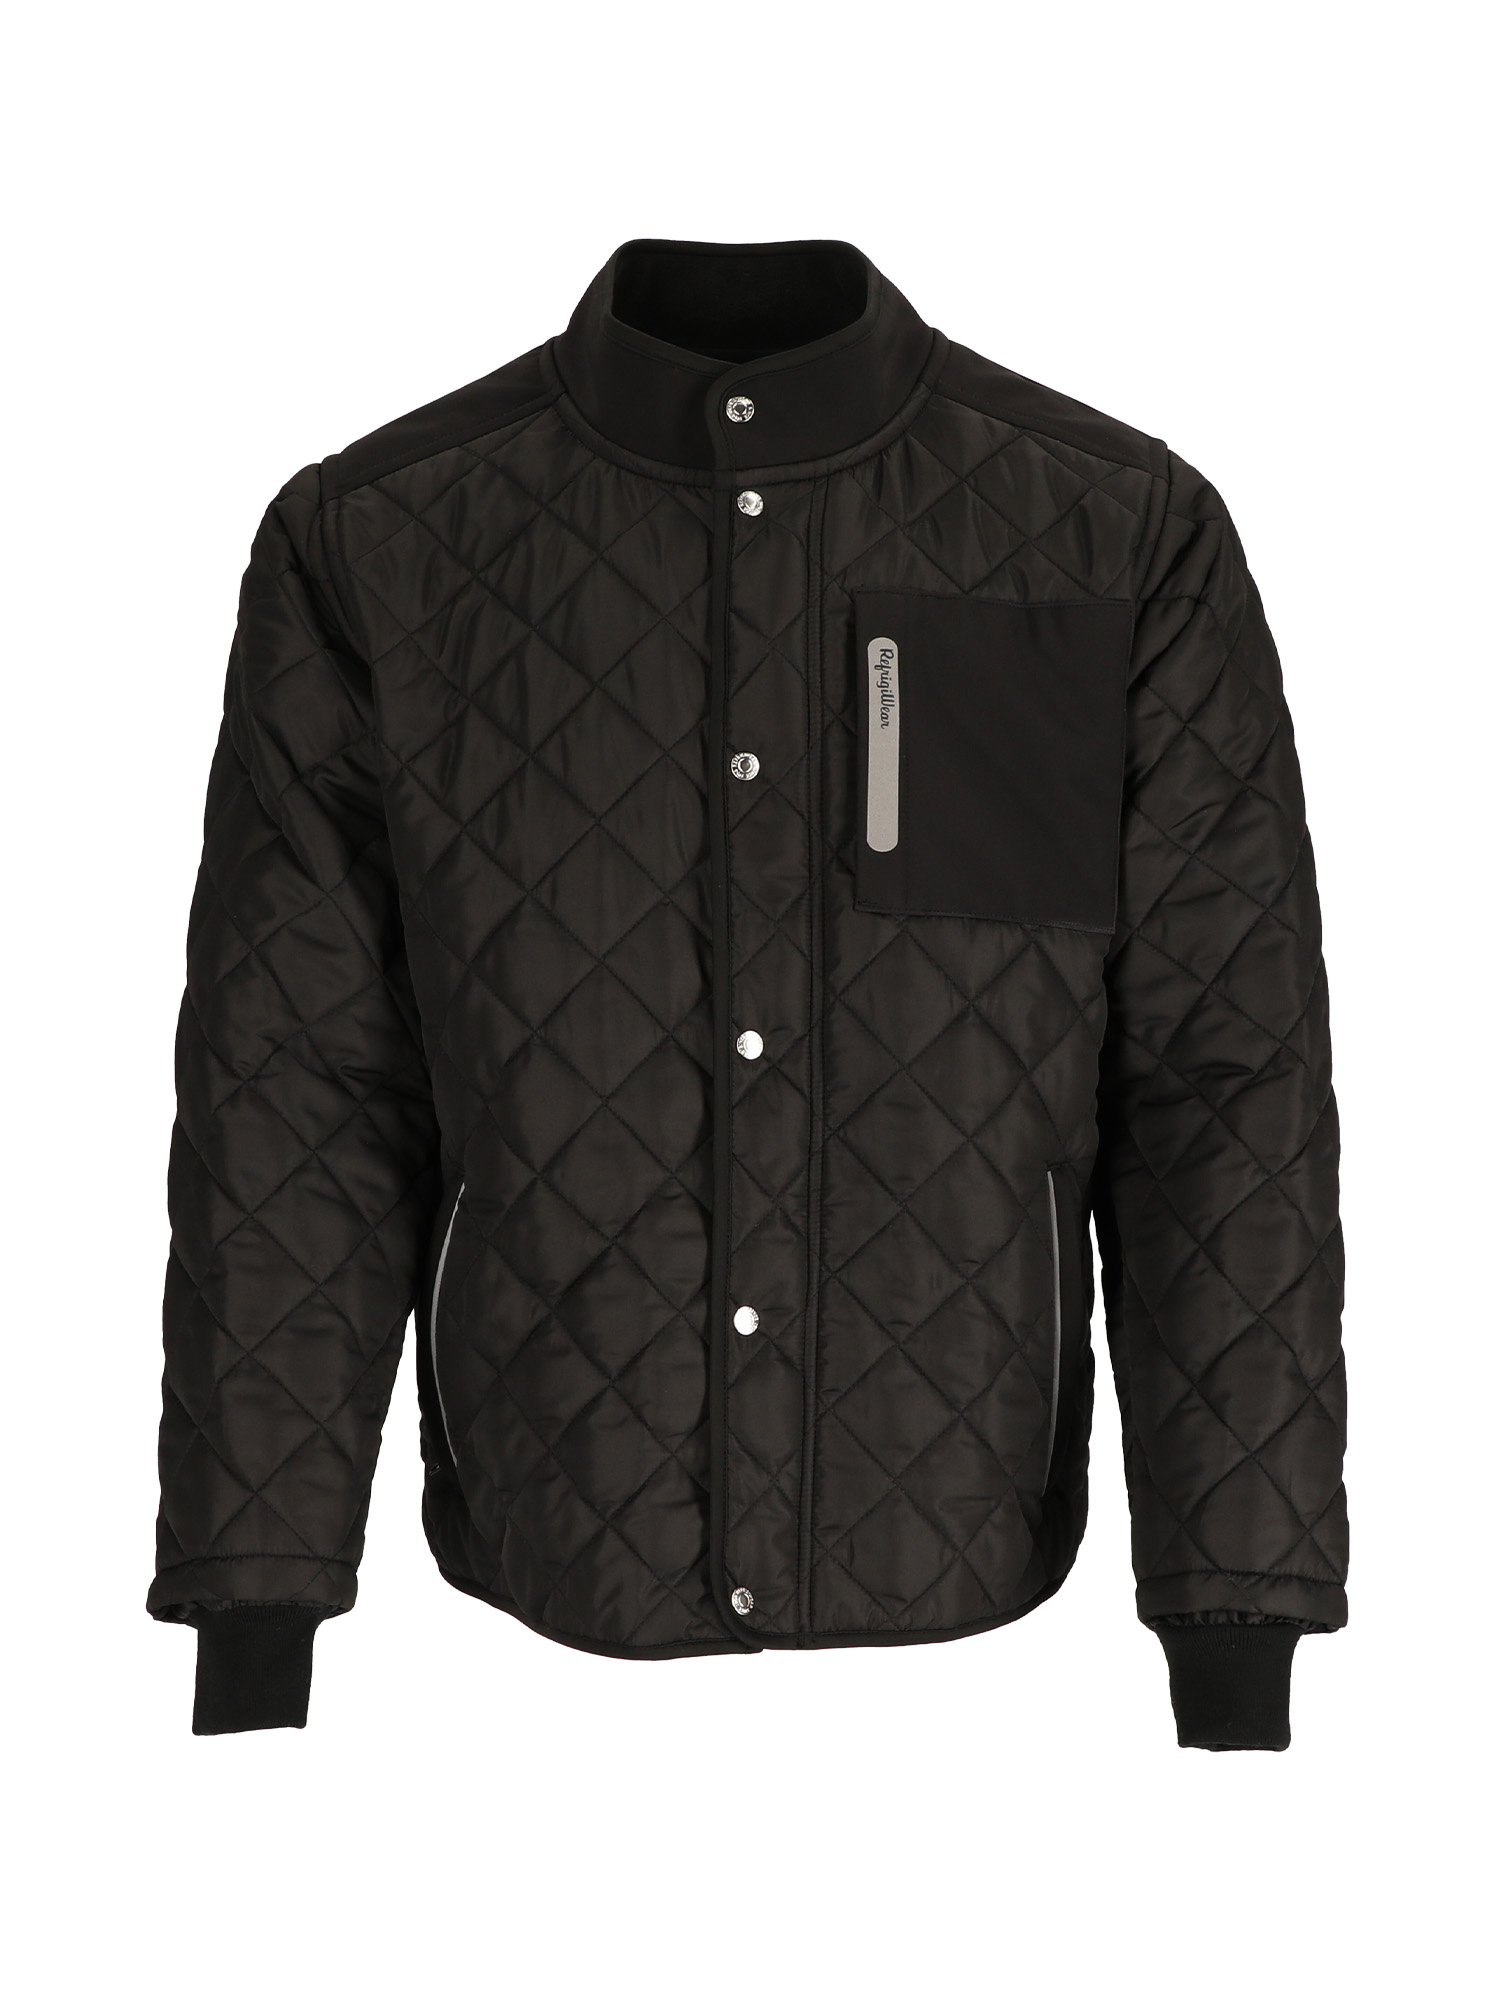 RefrigiWear Insulated Diamond Quilted Jacket | Black | Fit: Big & Tall | 100% Polyester | 2XL